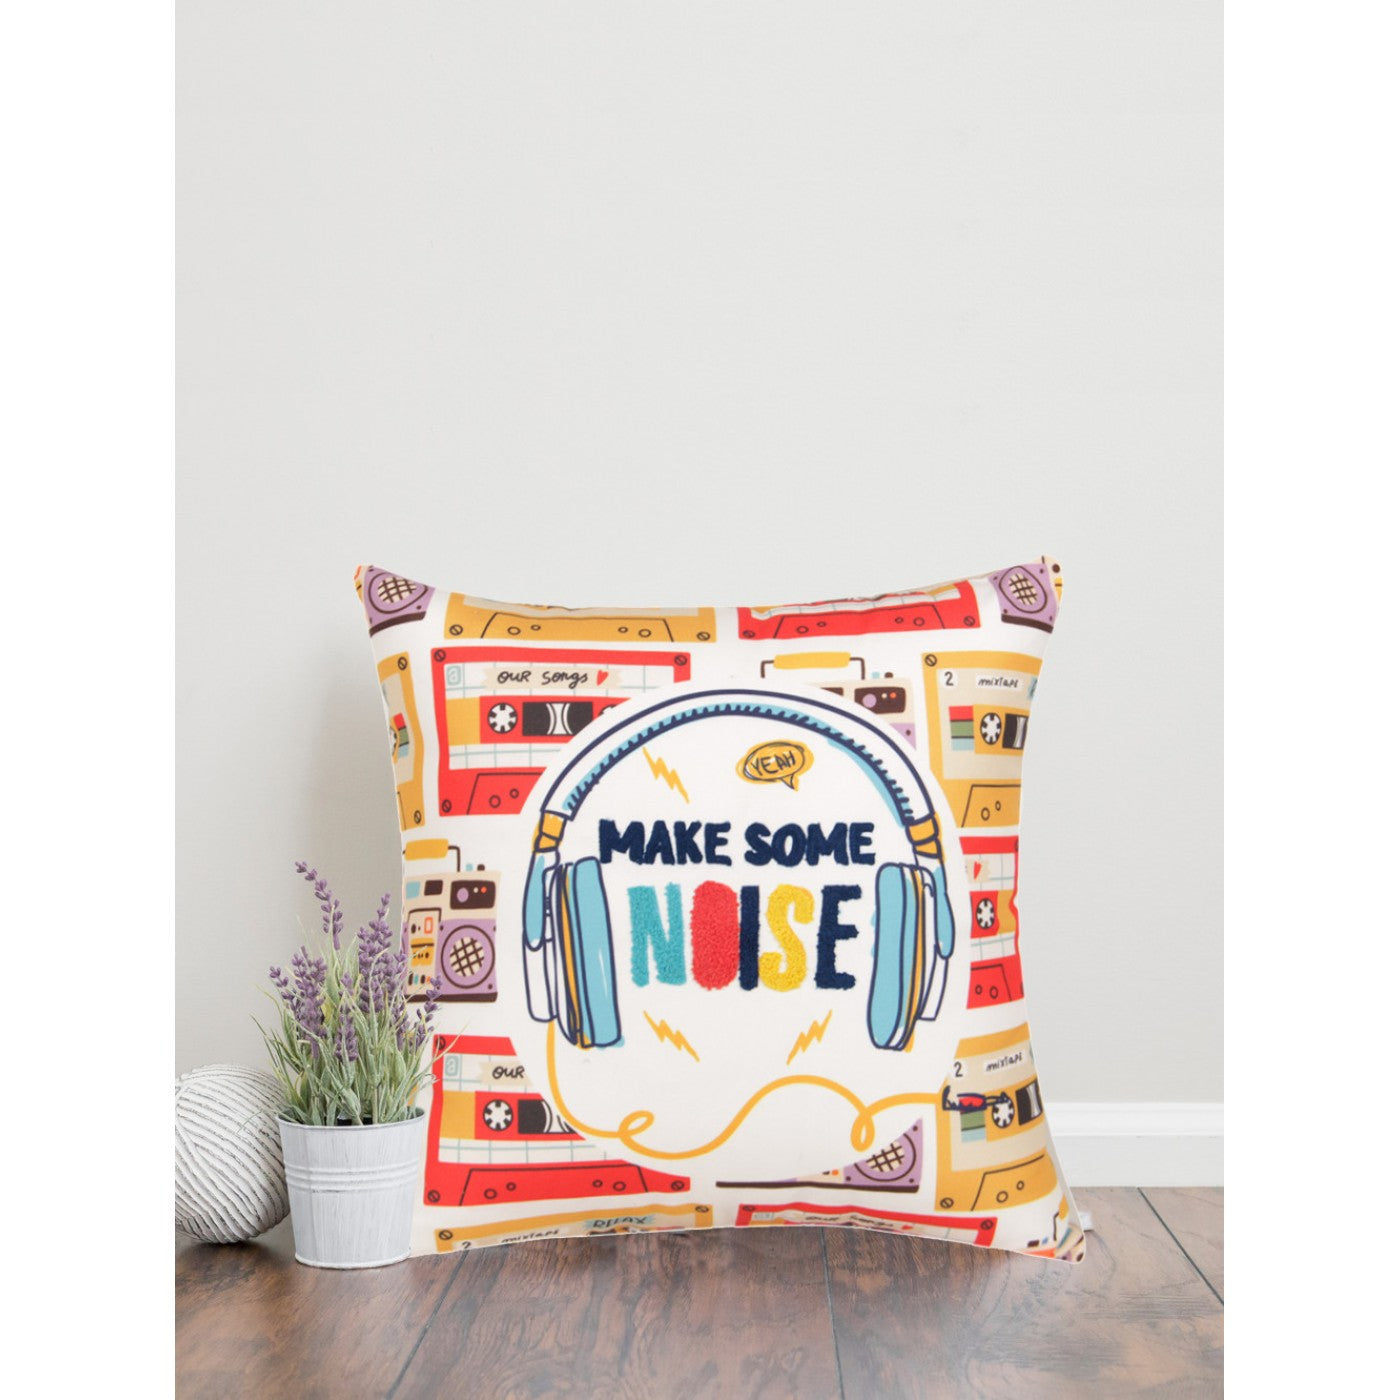 Melodic Harmony: 16x16 Inch Music-Themed Printed & Embroidered Cushion Covers